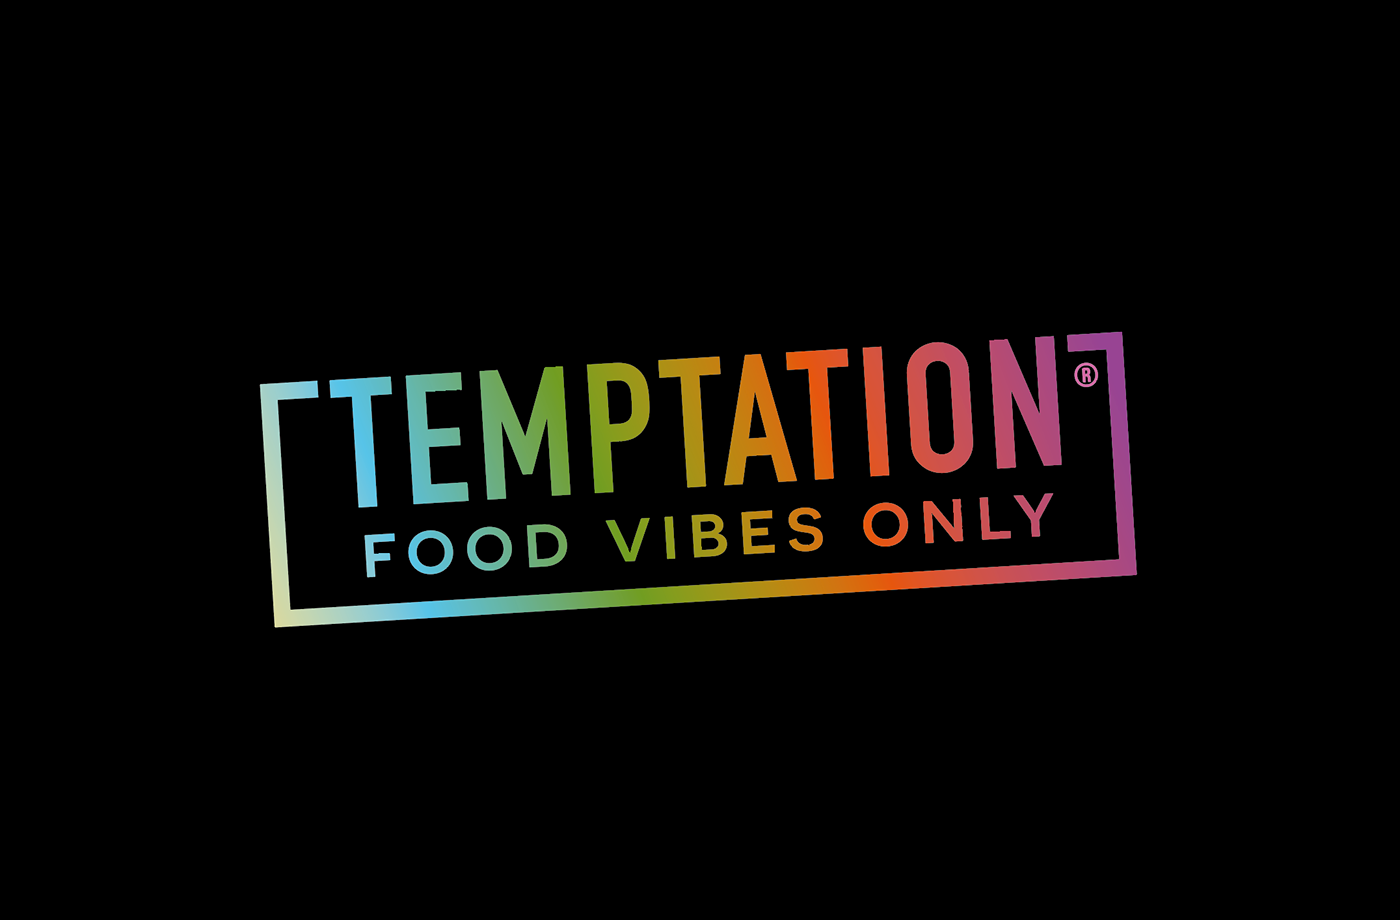 vibes temptation Asian Food ribs takeaway Packaging brand identity logo only